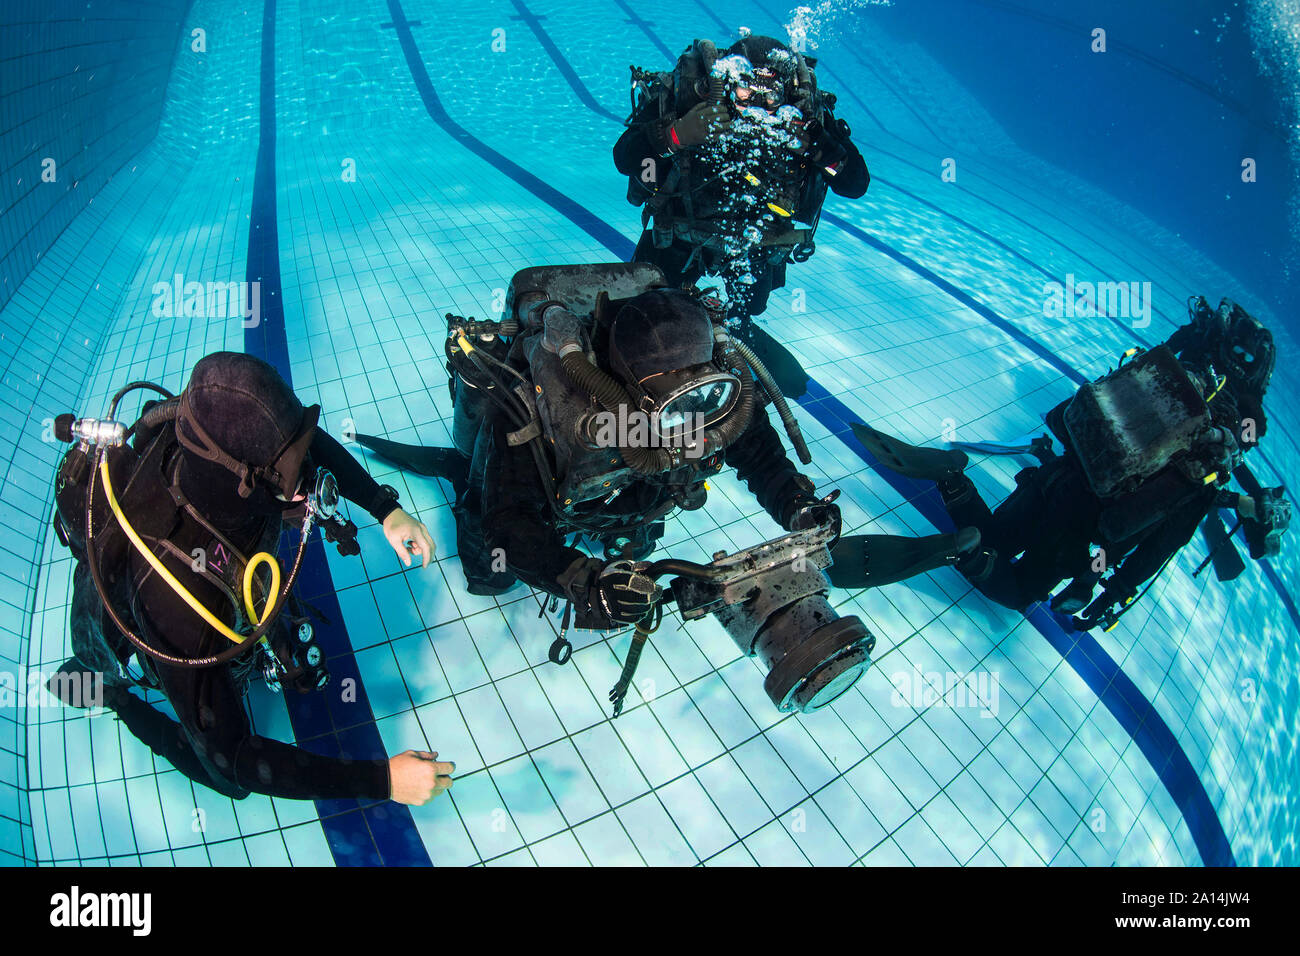 Divers using the DNS-300 underwater sonar system. Stock Photo